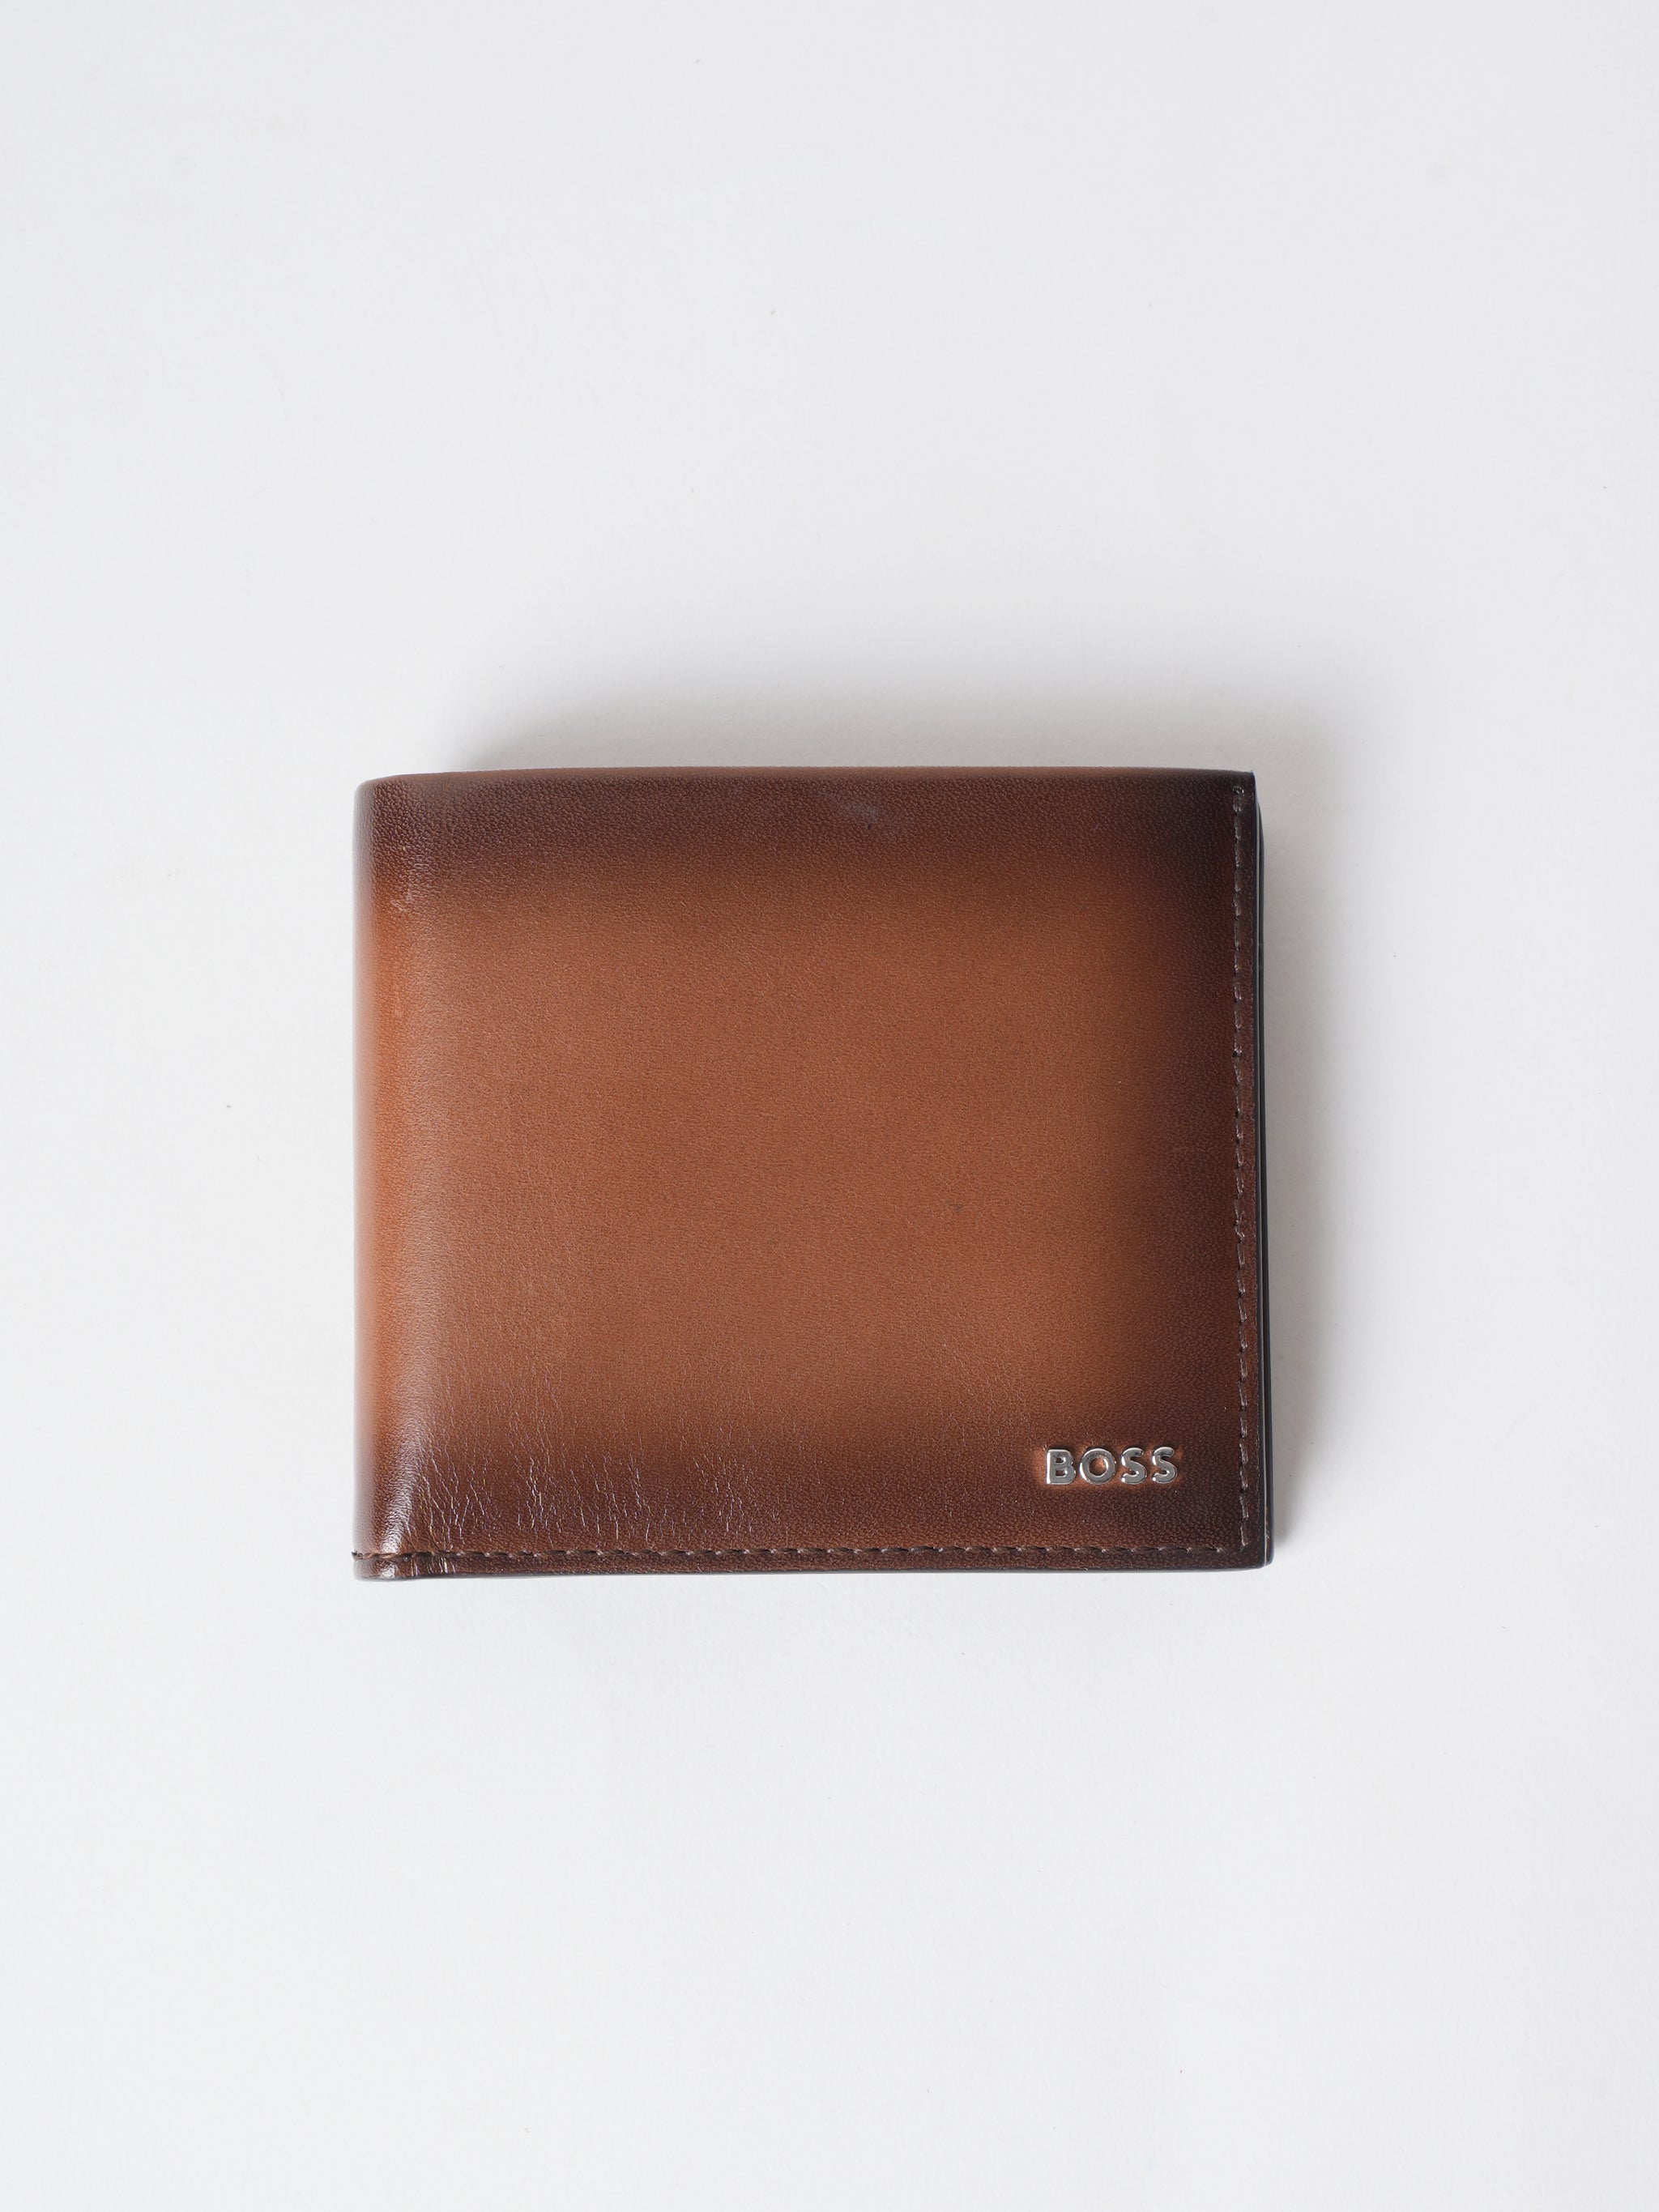 Hugo Boss Leather Wallet With Polished Silver Lettering